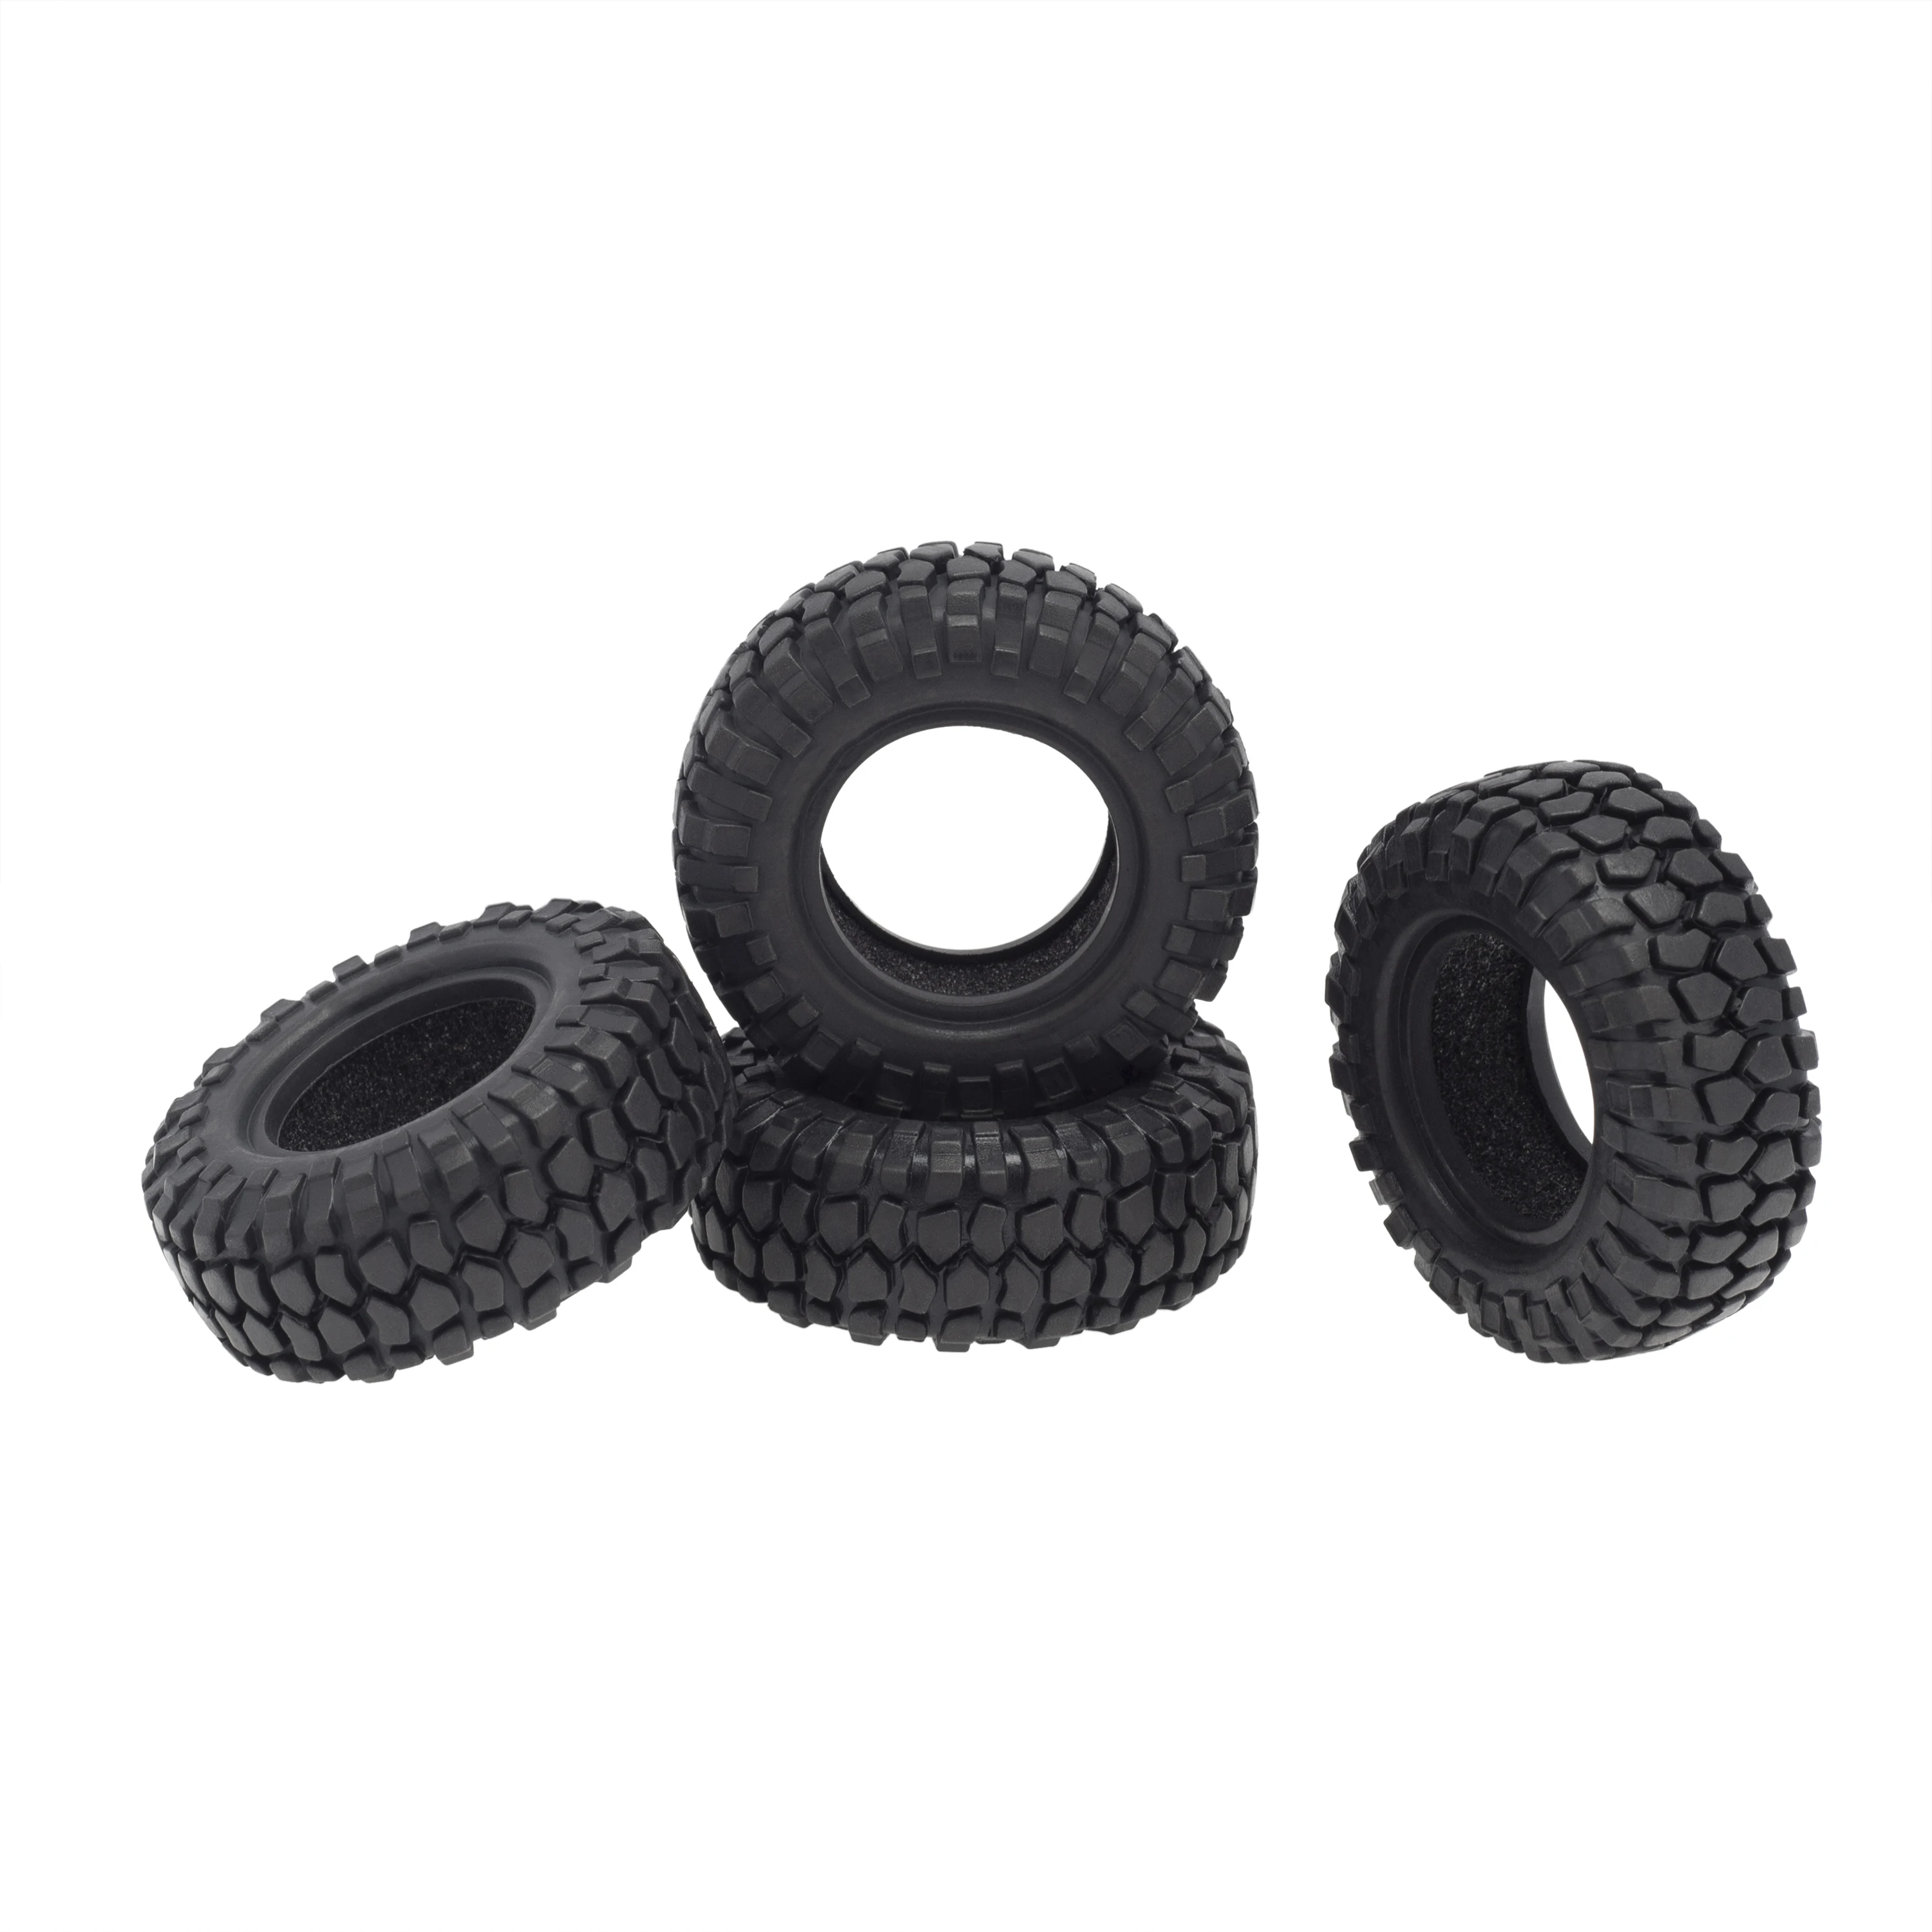 

4PCS 48mm 1.0 Soft Rubber Wheel Tires Tyre for 1/24 RC Crawler Car Axial SCX24 90081 AXI00002 Upgrade Parts